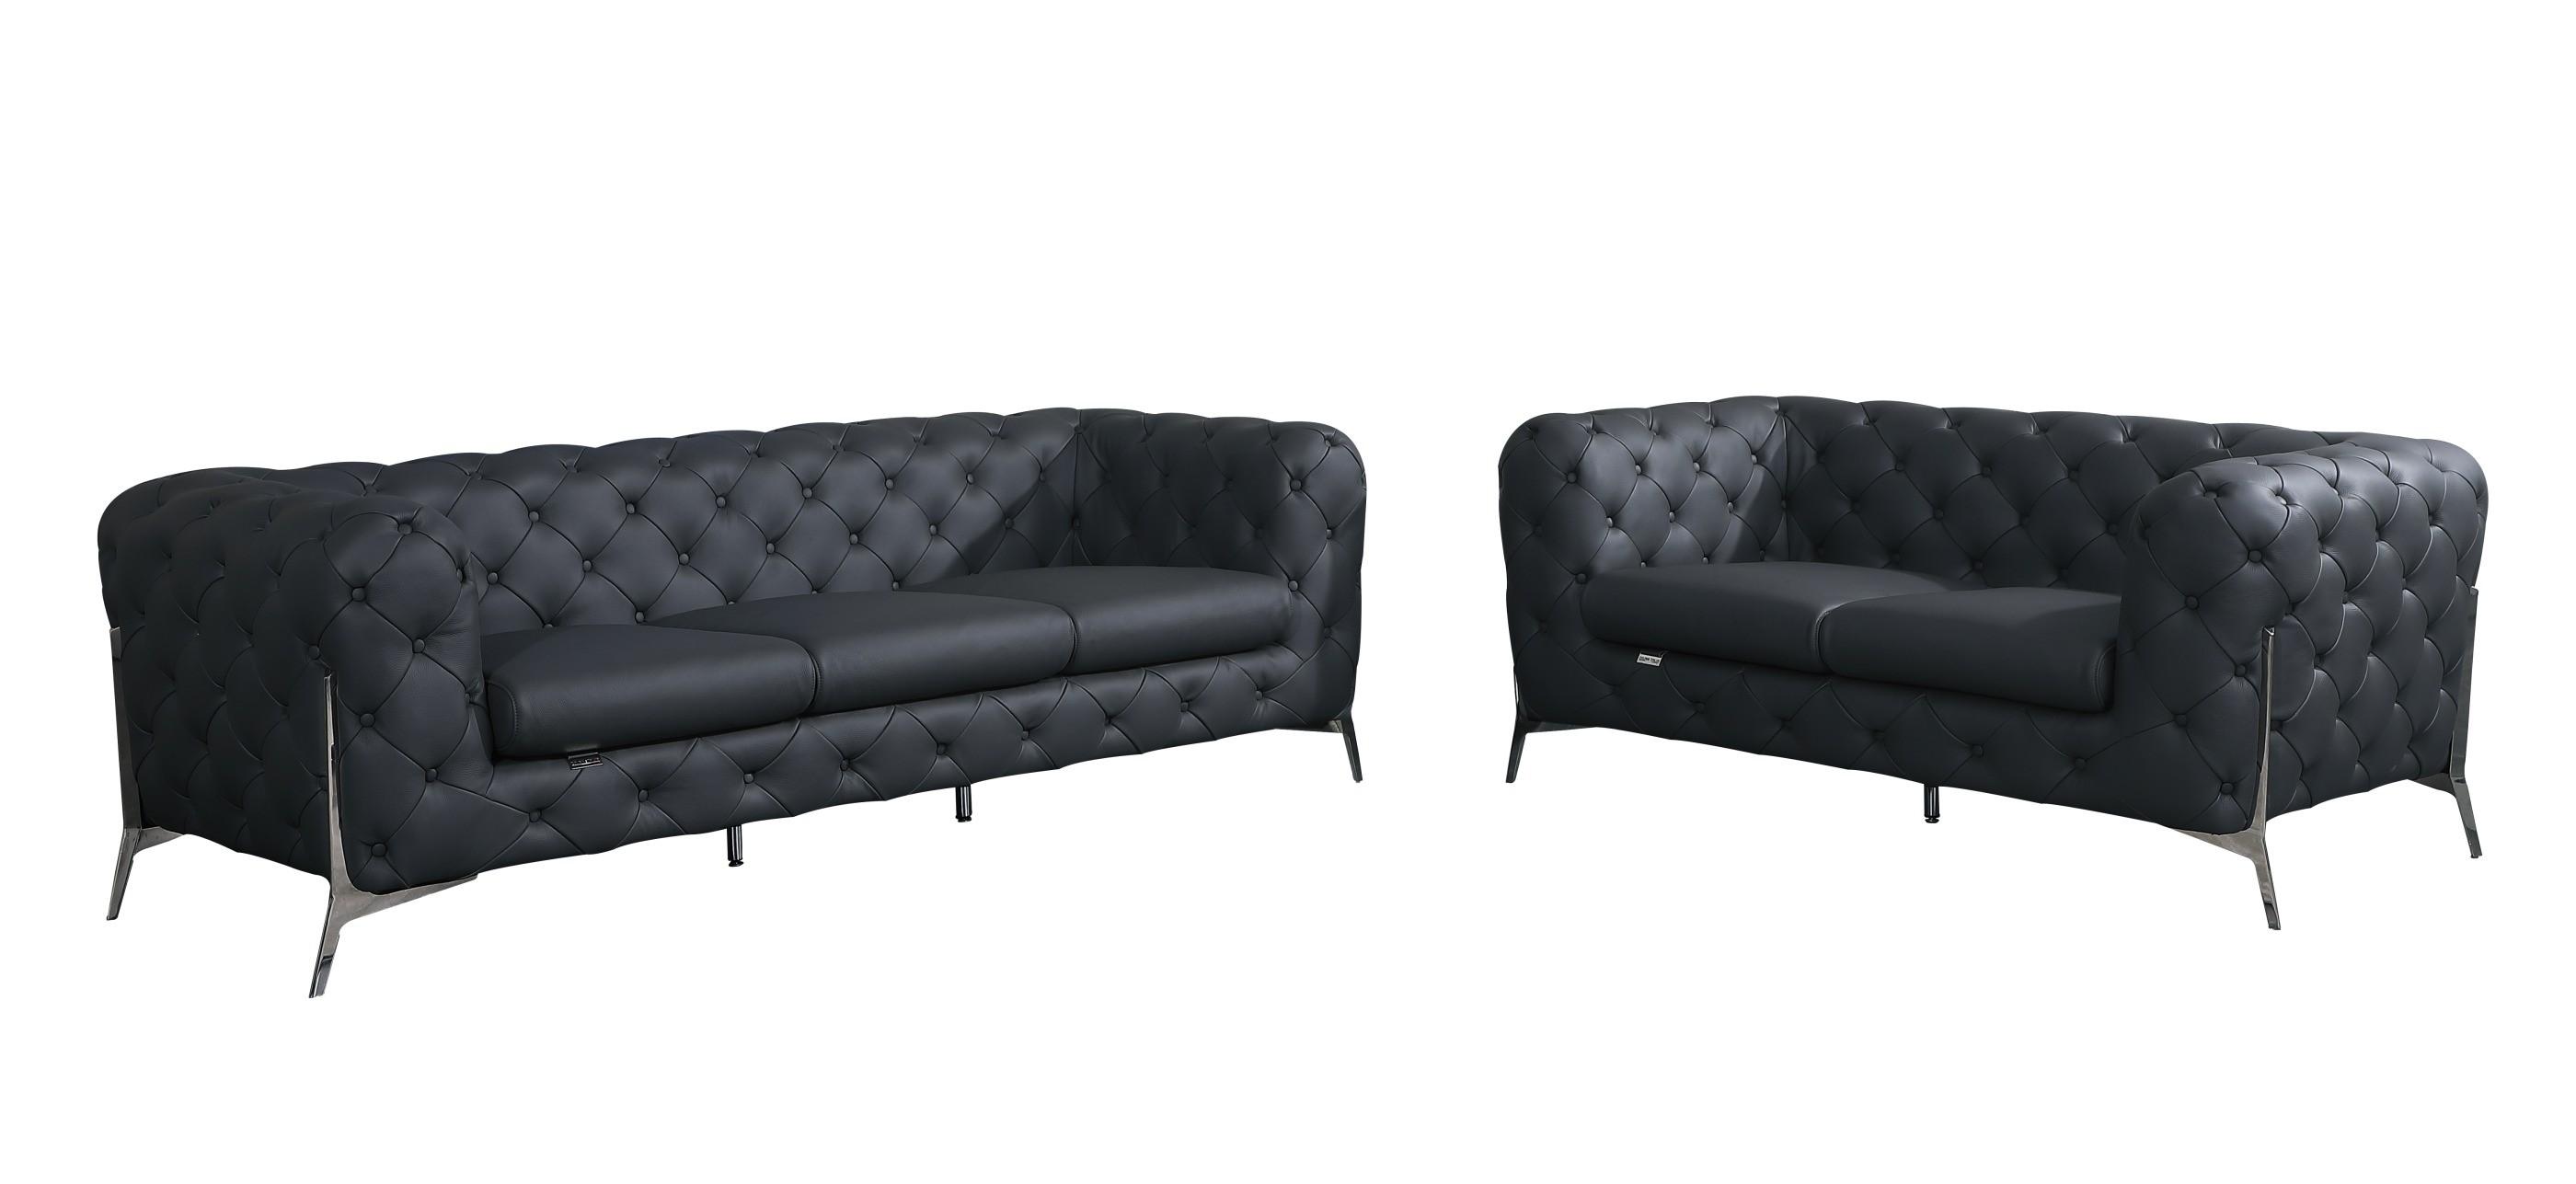 Contemporary Sofa and Loveseat Set 970 970-DK_GRAY-2PC in Dark Gray Top grain leather